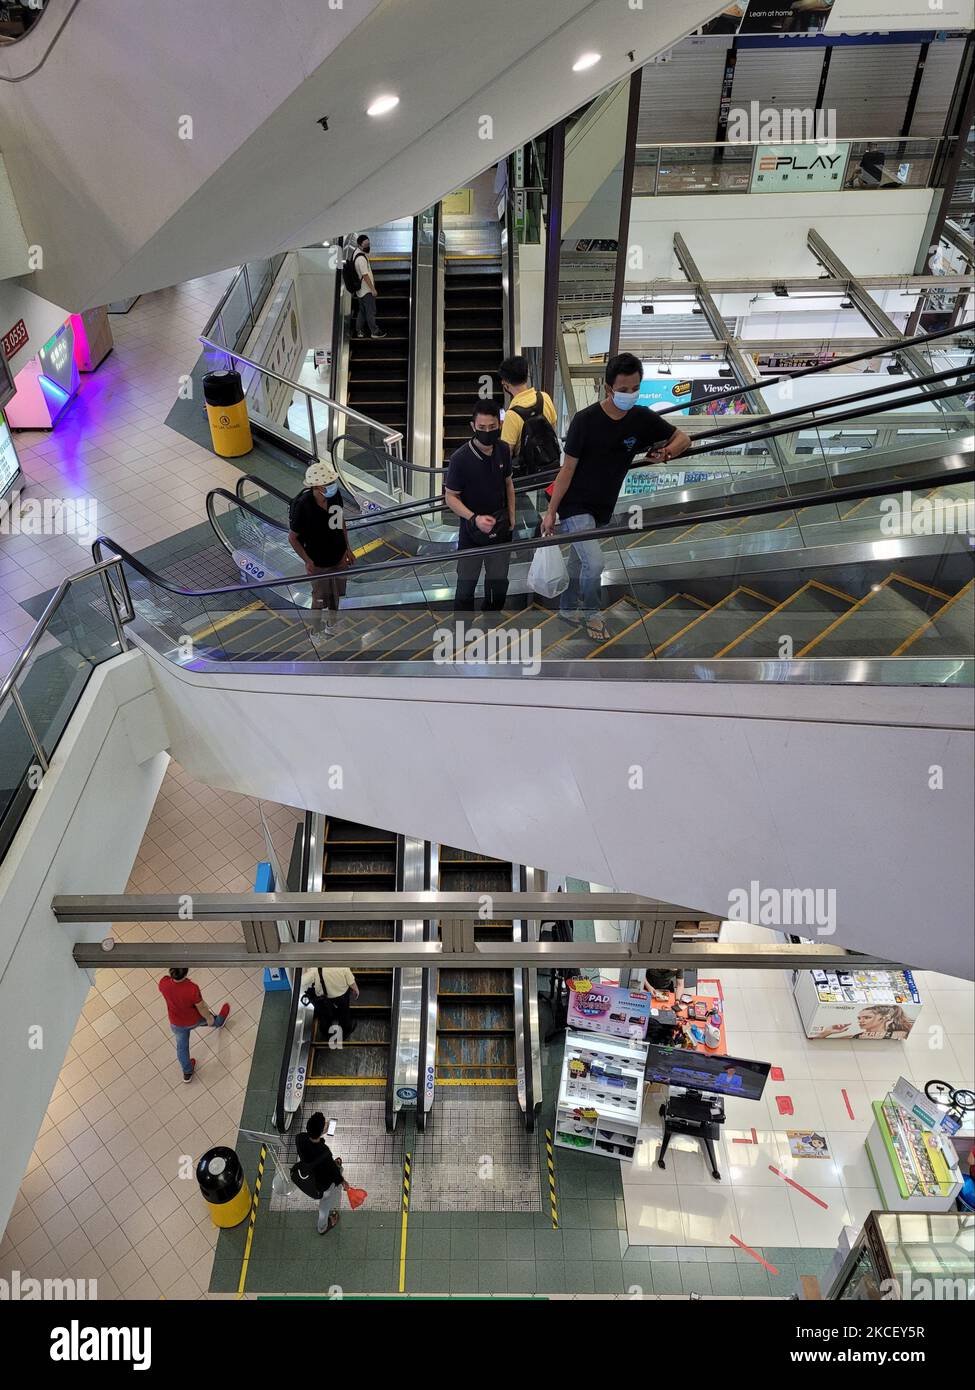 Shoppers wearing masks ride escalators in a Shopping mall in Singapore days after new lockdown measures were announced after a spike in Covid-19 cases, 20 May 2021. (Photo by Joseph Nair/NurPhoto) Stock Photo